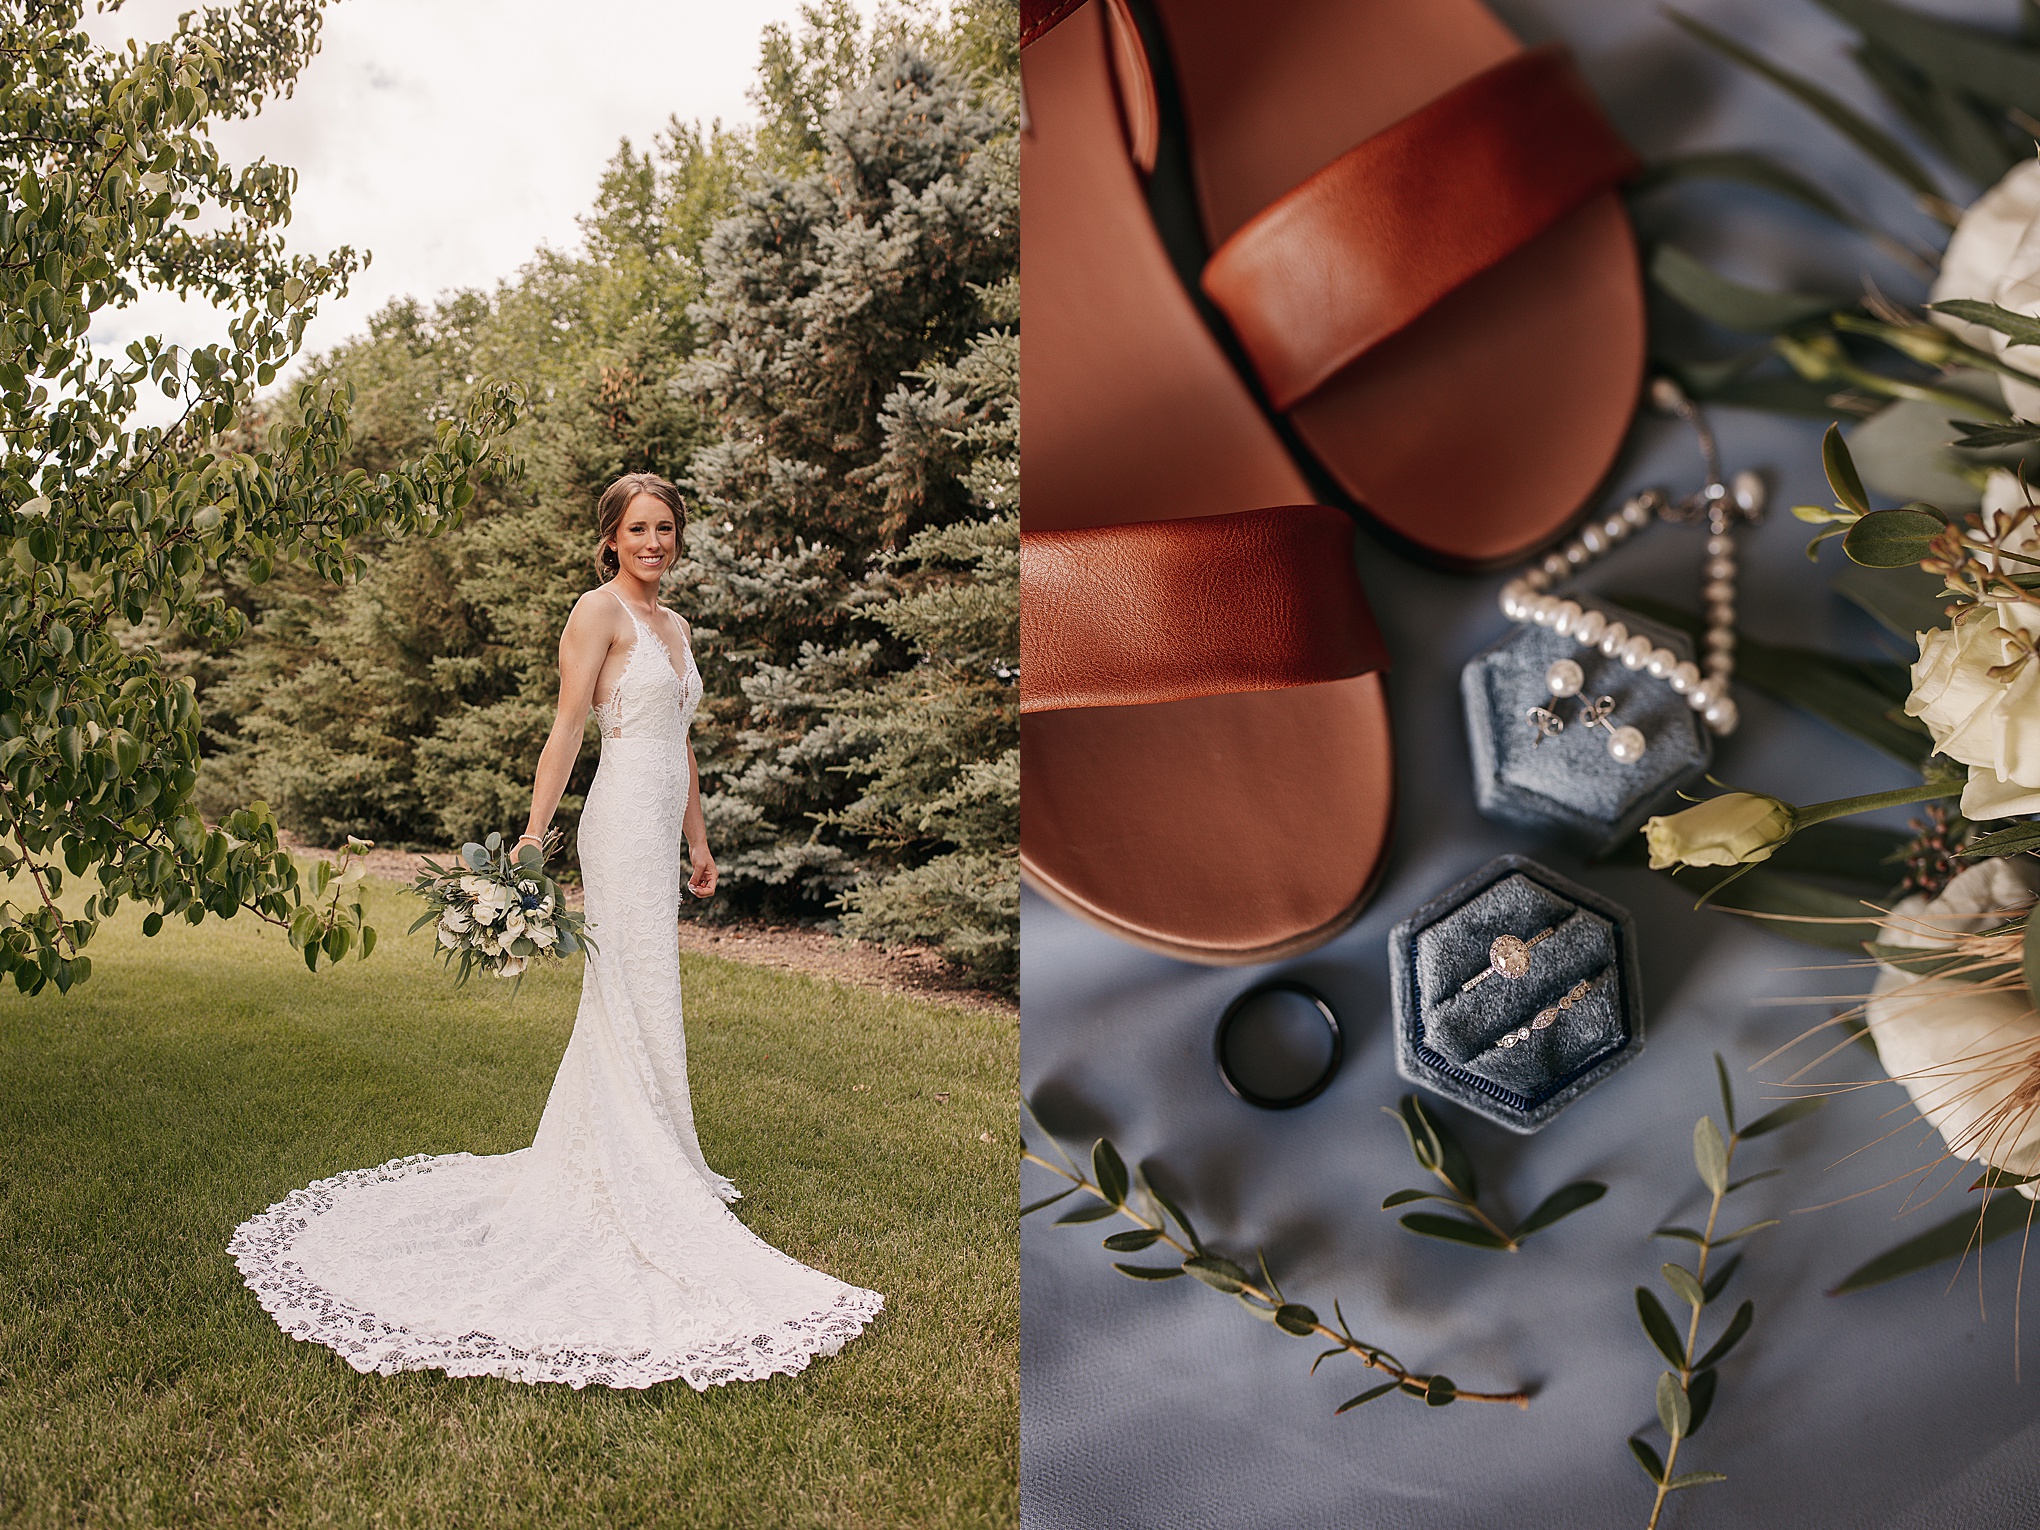 How to style a flat lay wedding photo